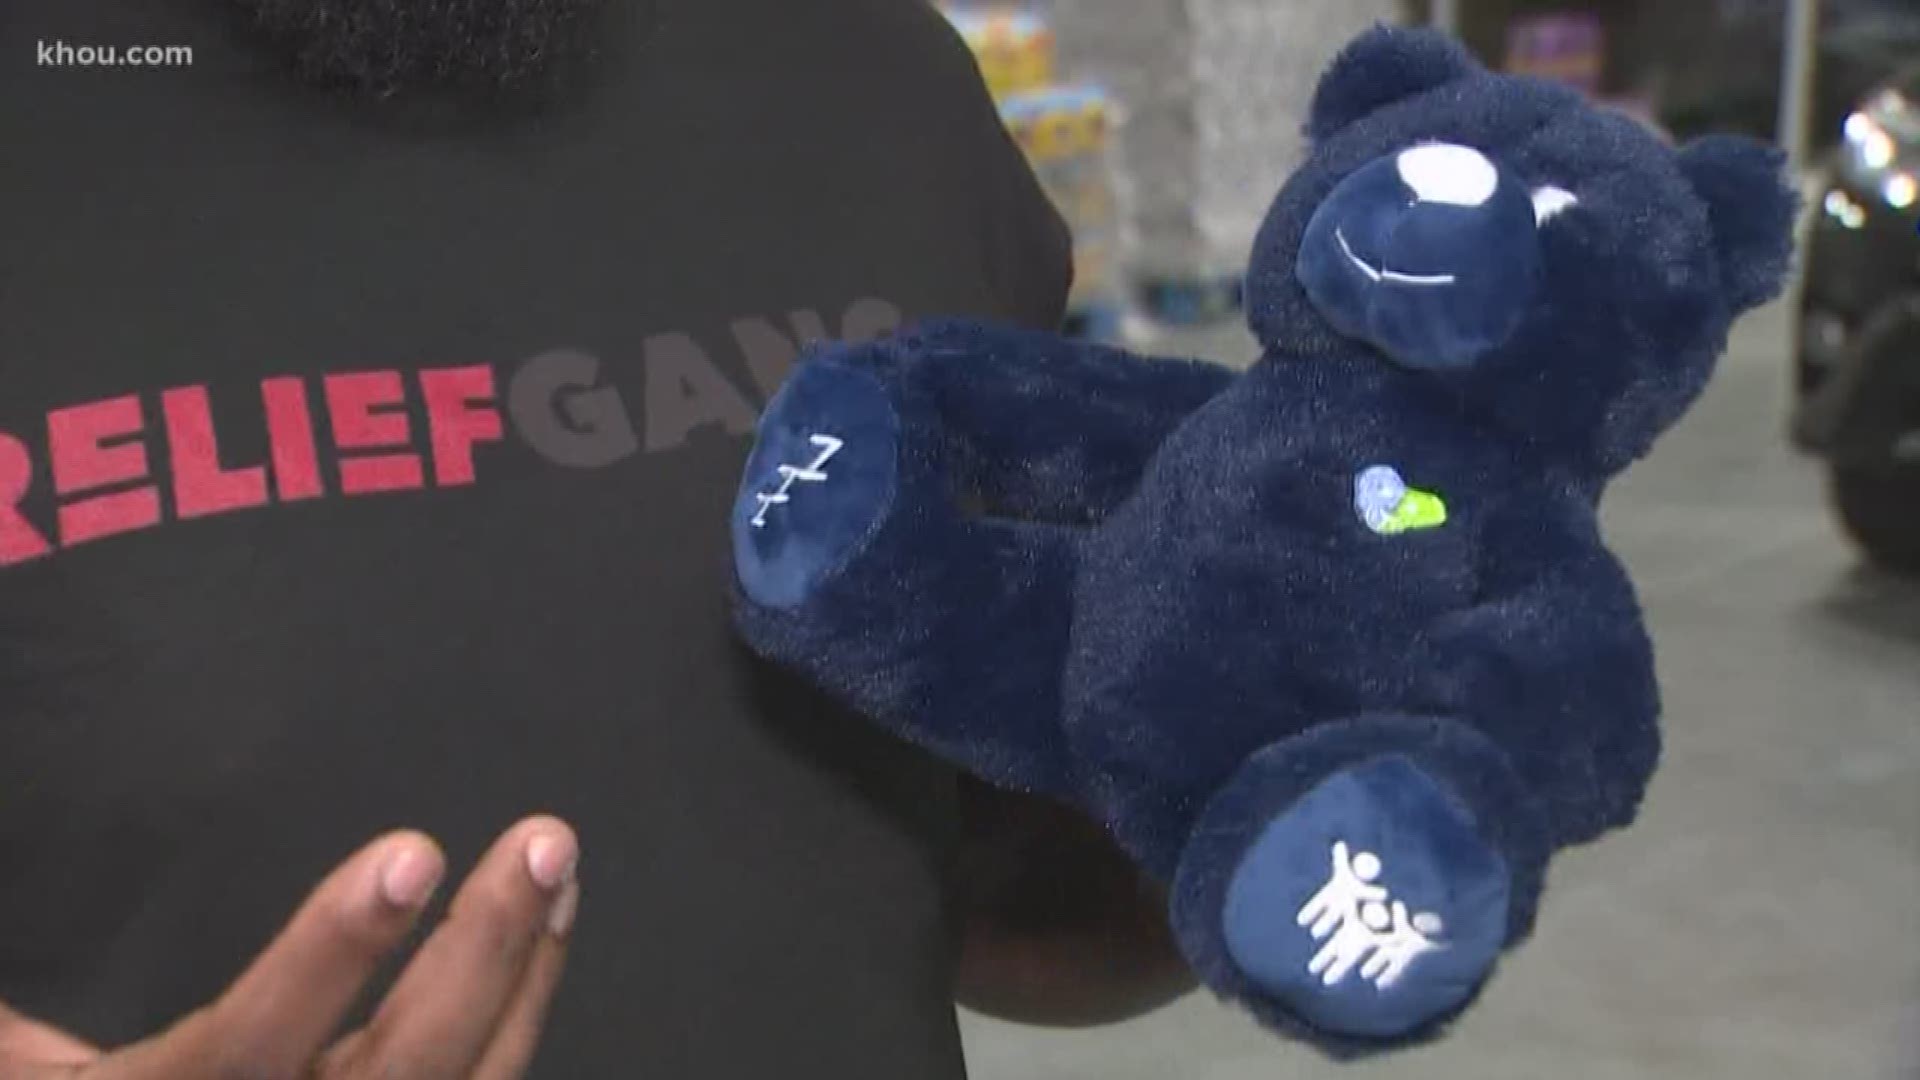 Trae Tha Truth, known for his music and work in the community, is part of a company selling a bear inspired by the rapper’s 16-year-old son.